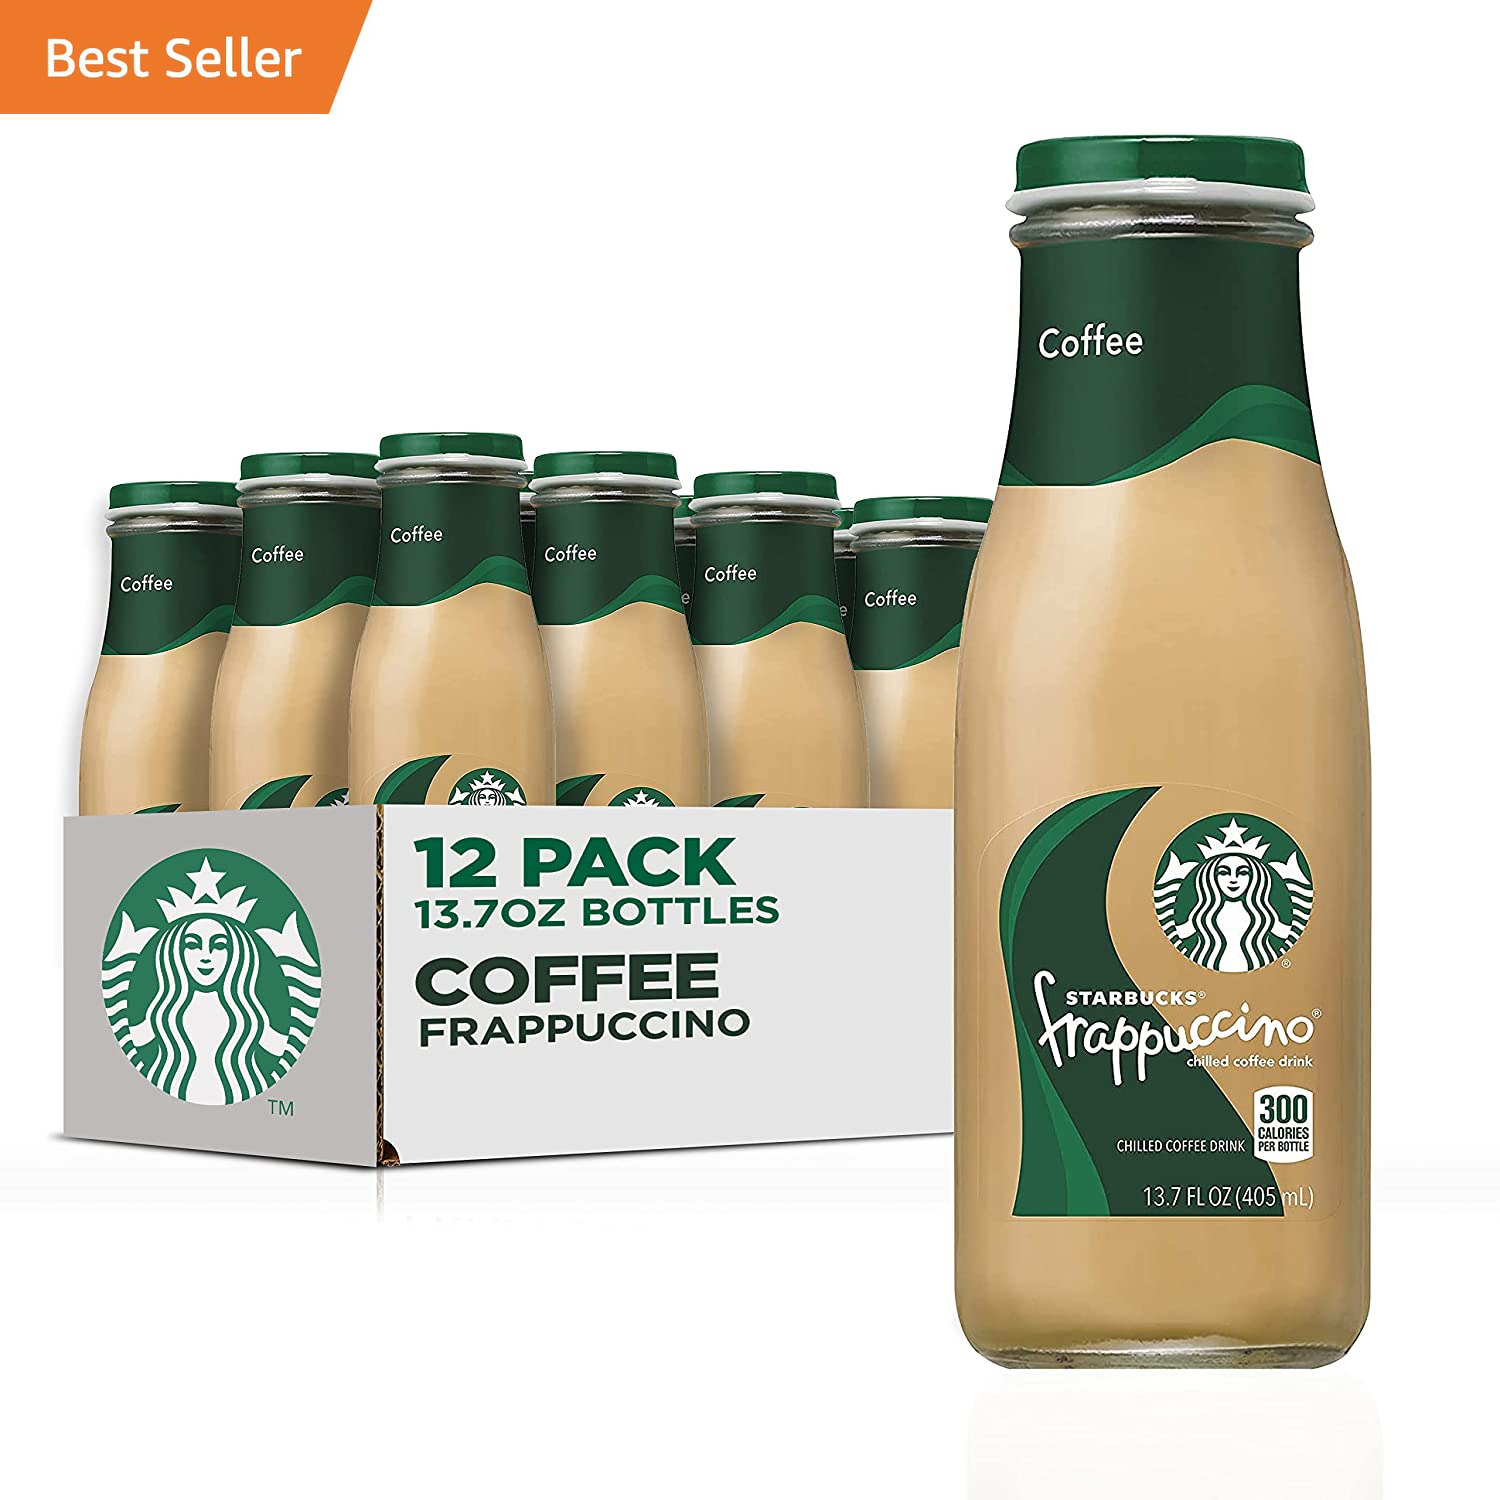 Frappuccino Coffee Drink, Coffee, 13.7 Fl Oz Bottles (12 Pack)